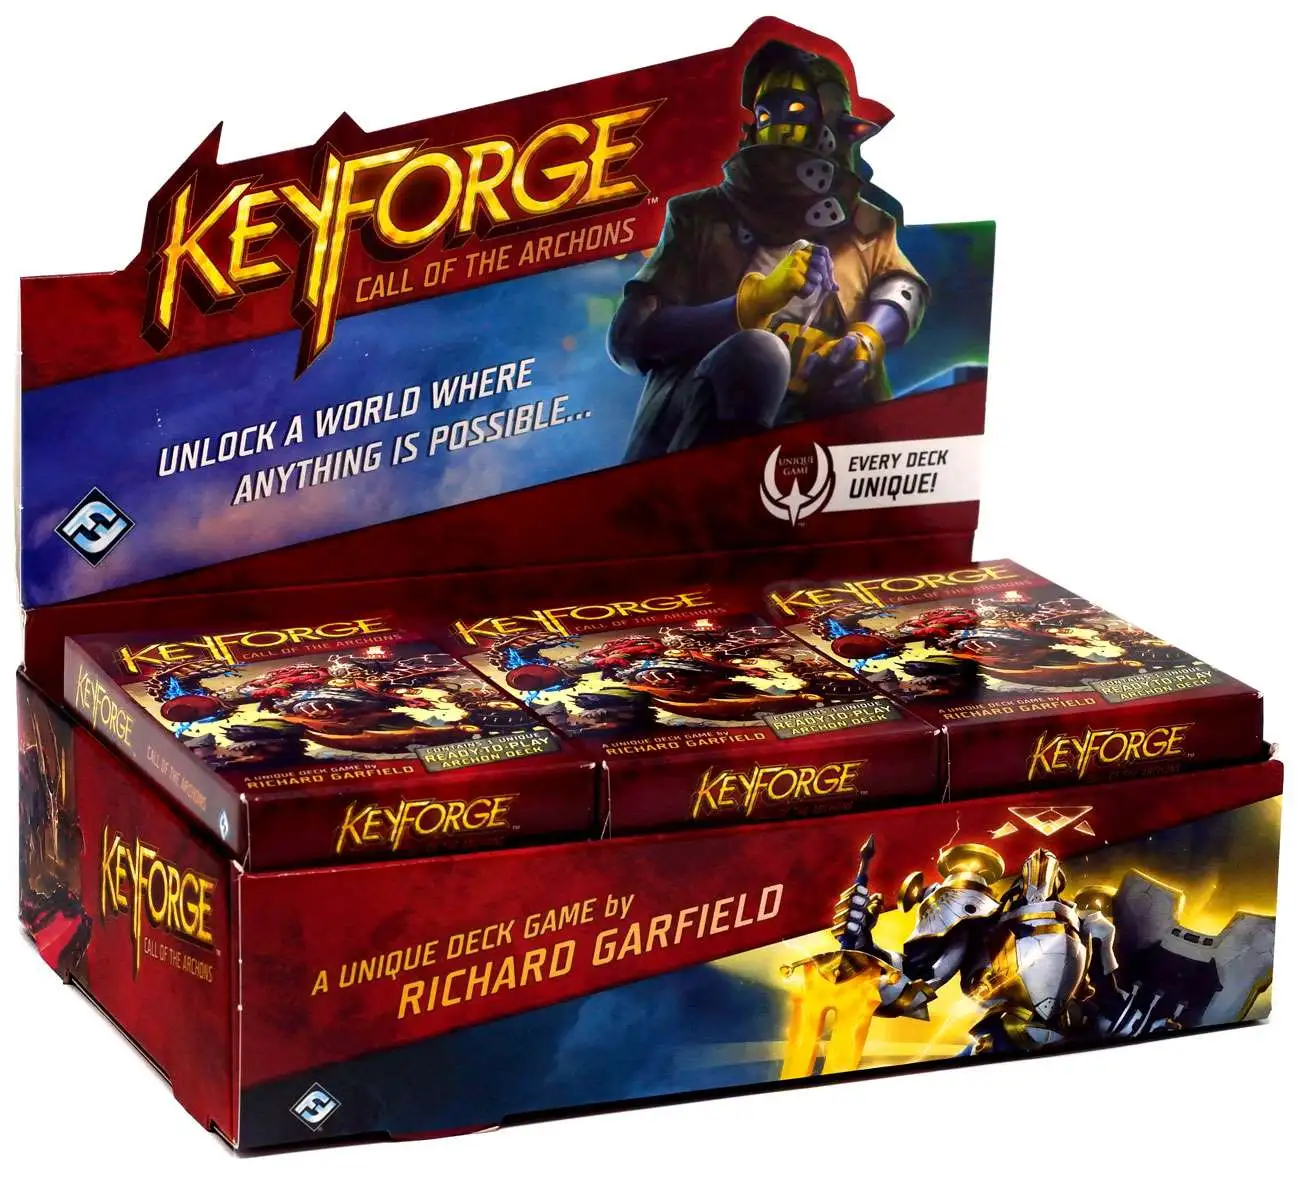 Call of the Archons Archon Deck for sale online Fantasy Flight Games KeyForge 